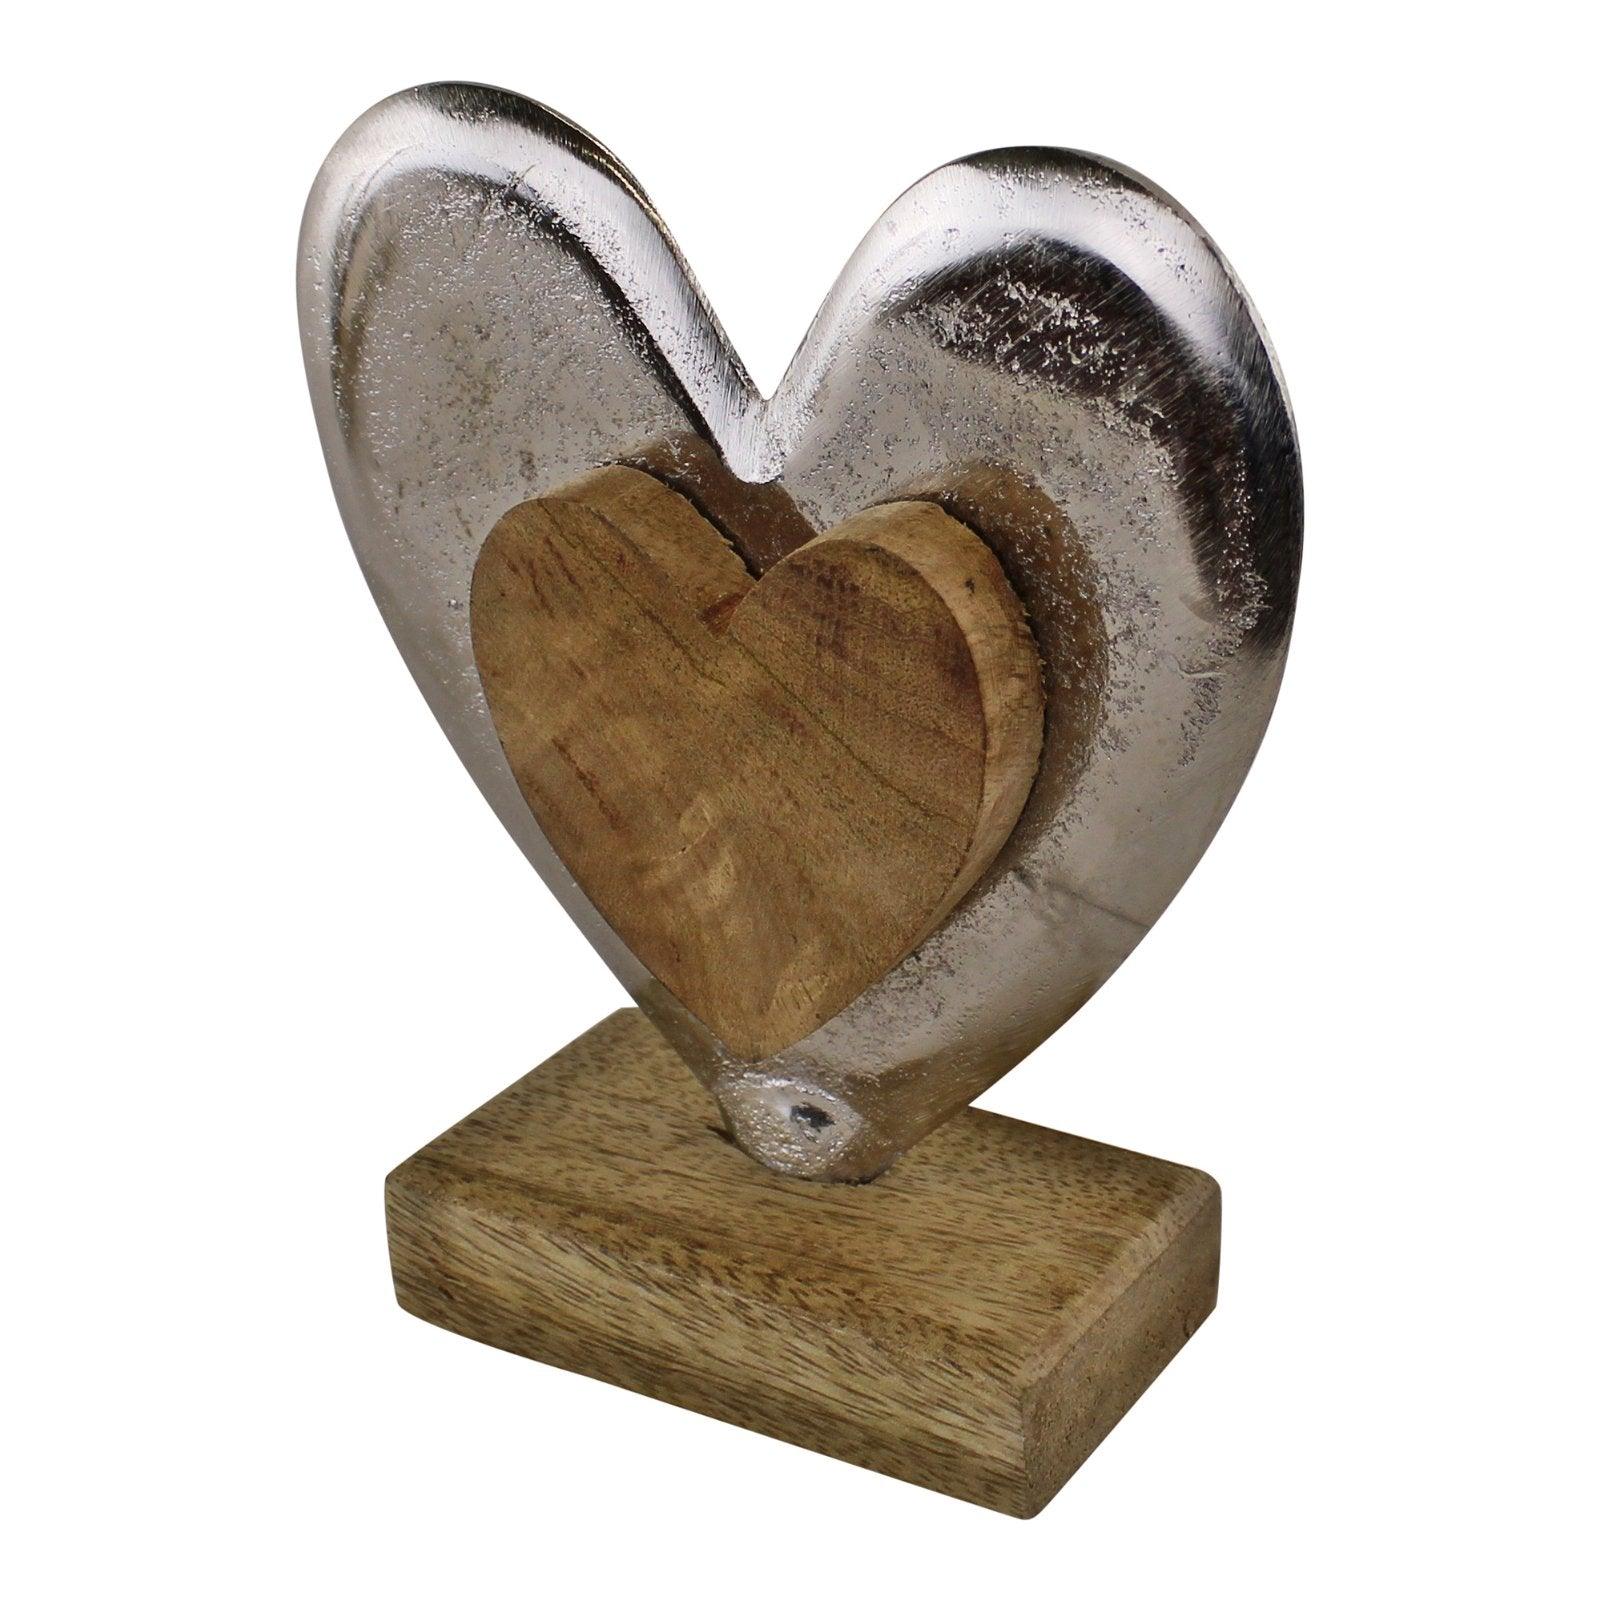 View Metal and Wood Standing Heart Decoration information